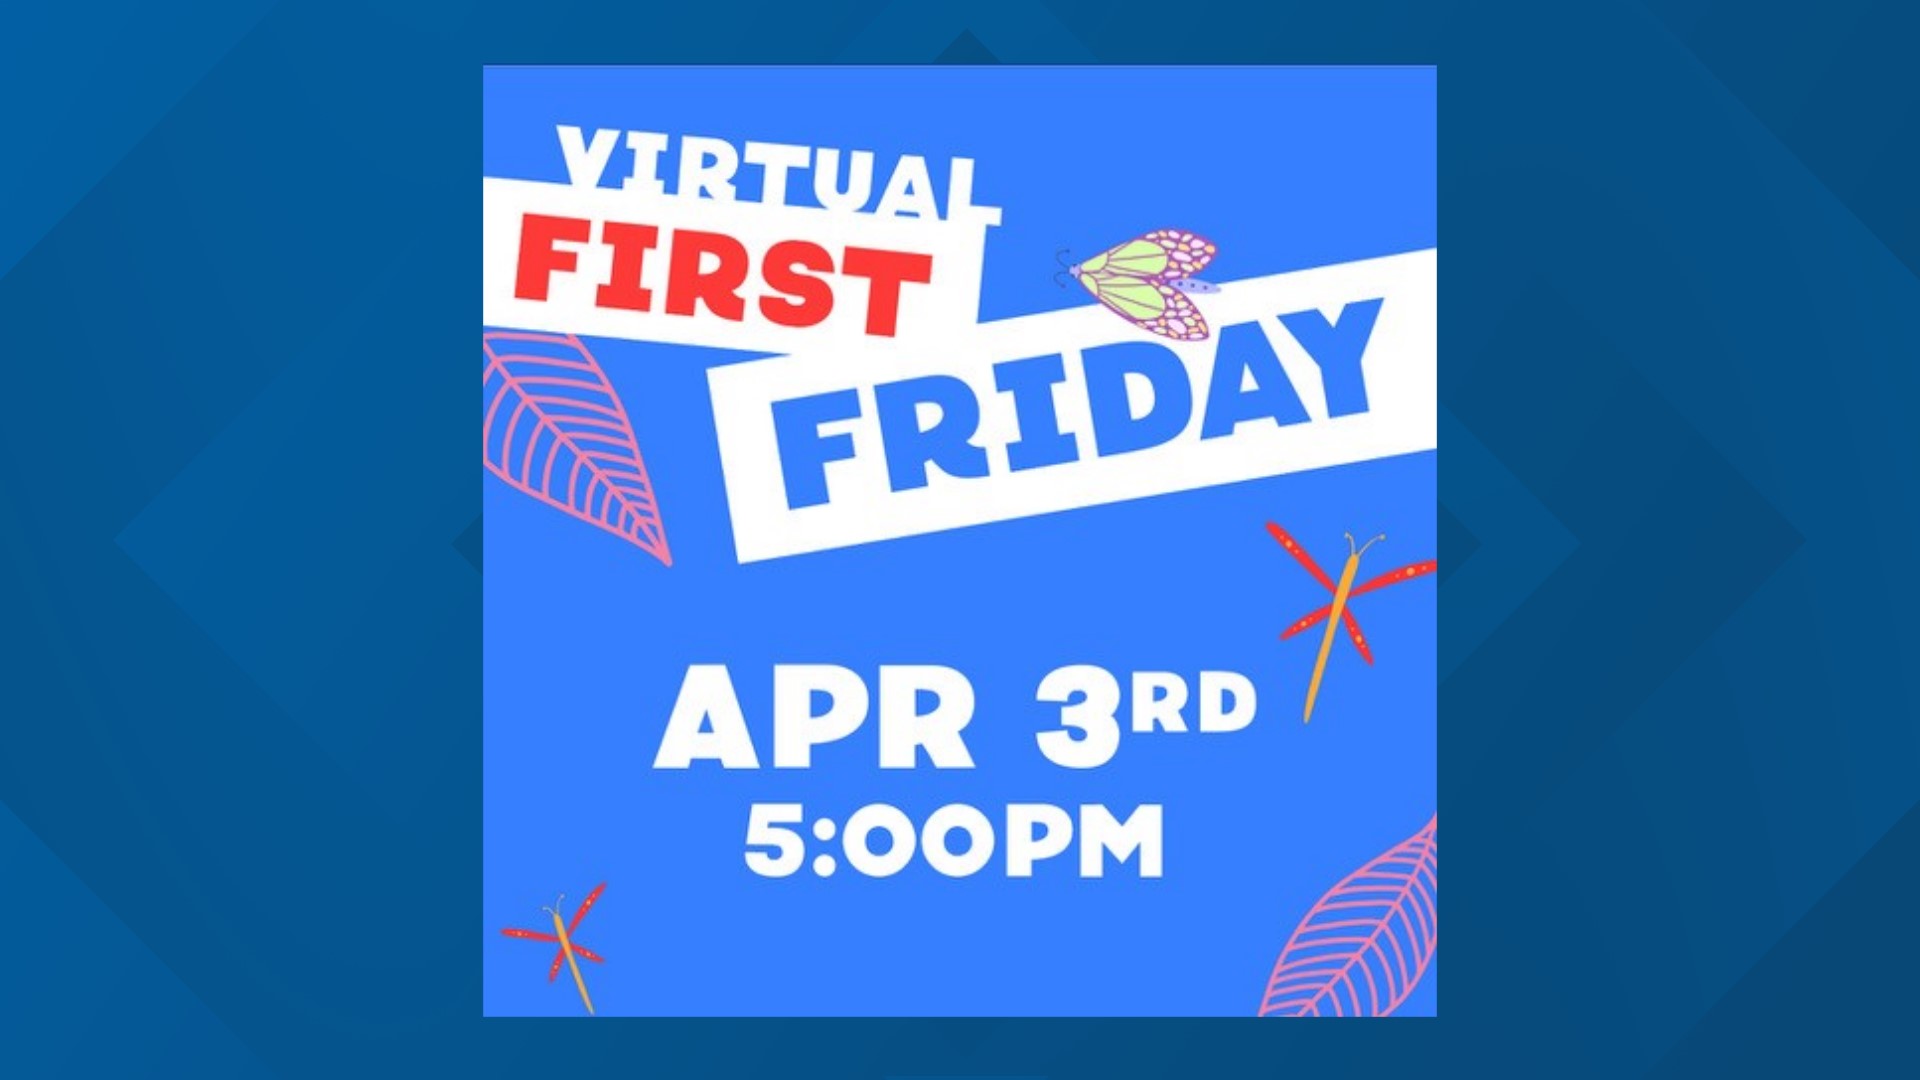 The City of Temple is hosting their first Virtual First Friday event from 5 to 8 p.m.